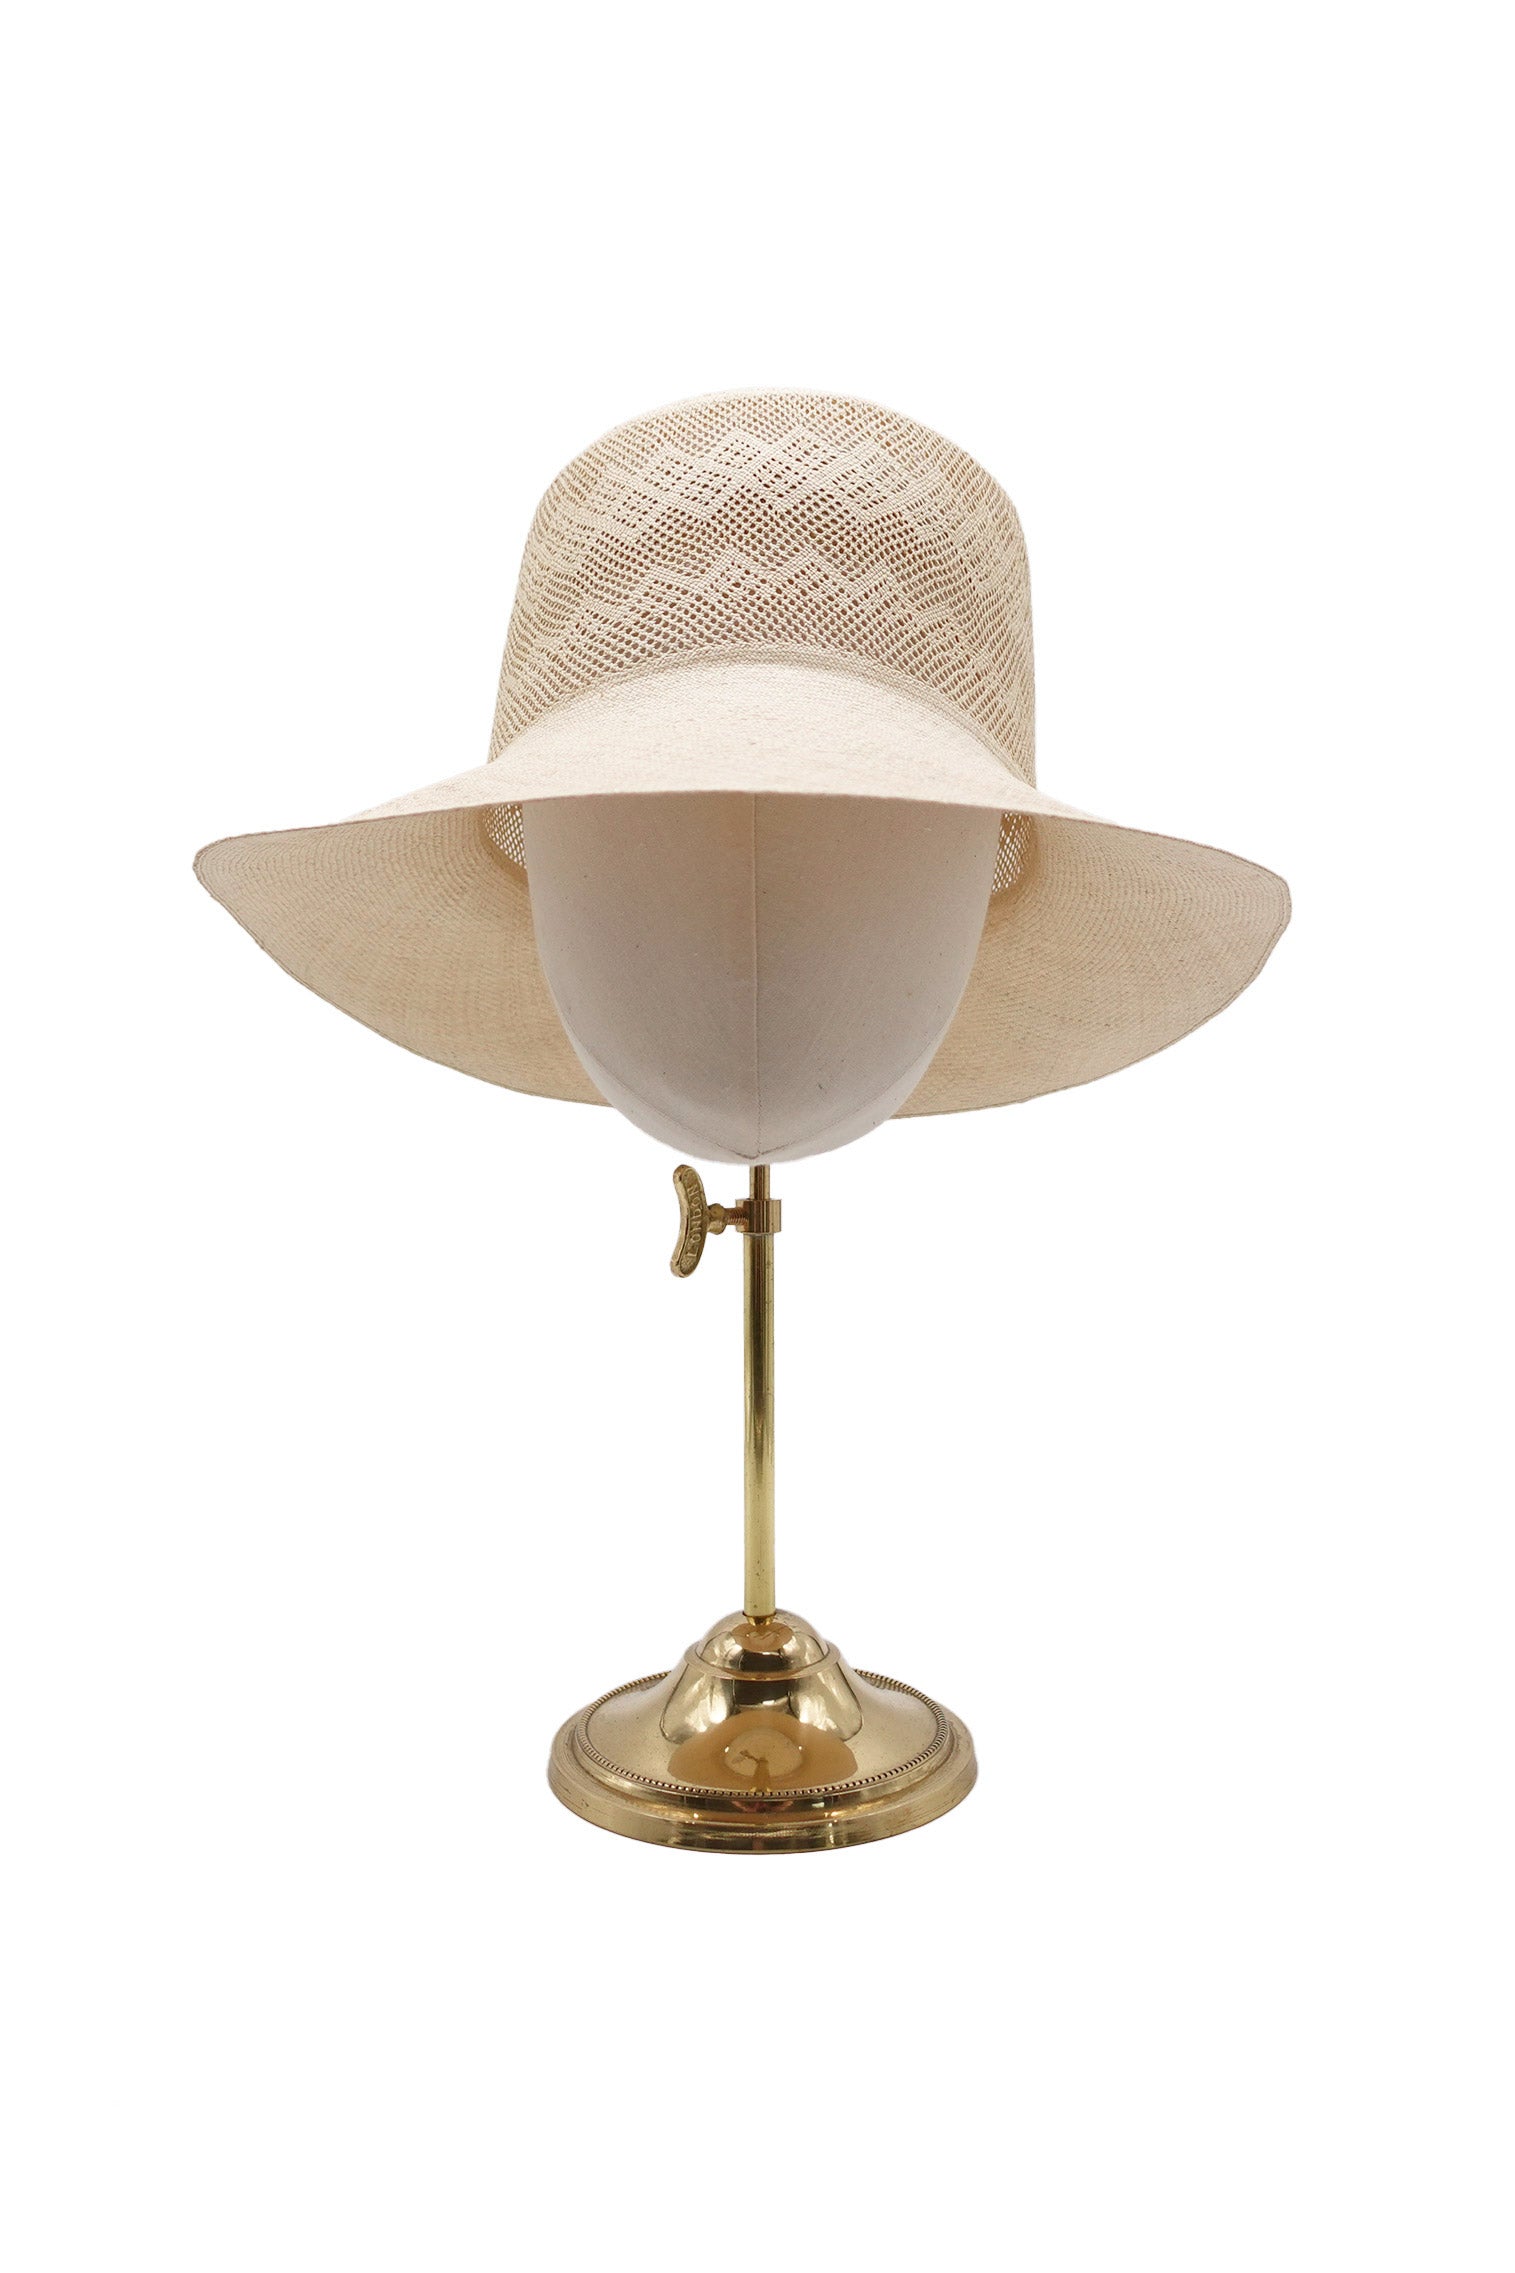 Florence Woven Panama - The Bespoke Embroidered Panama Hat Collection - Lock & Co. Hatters London UK